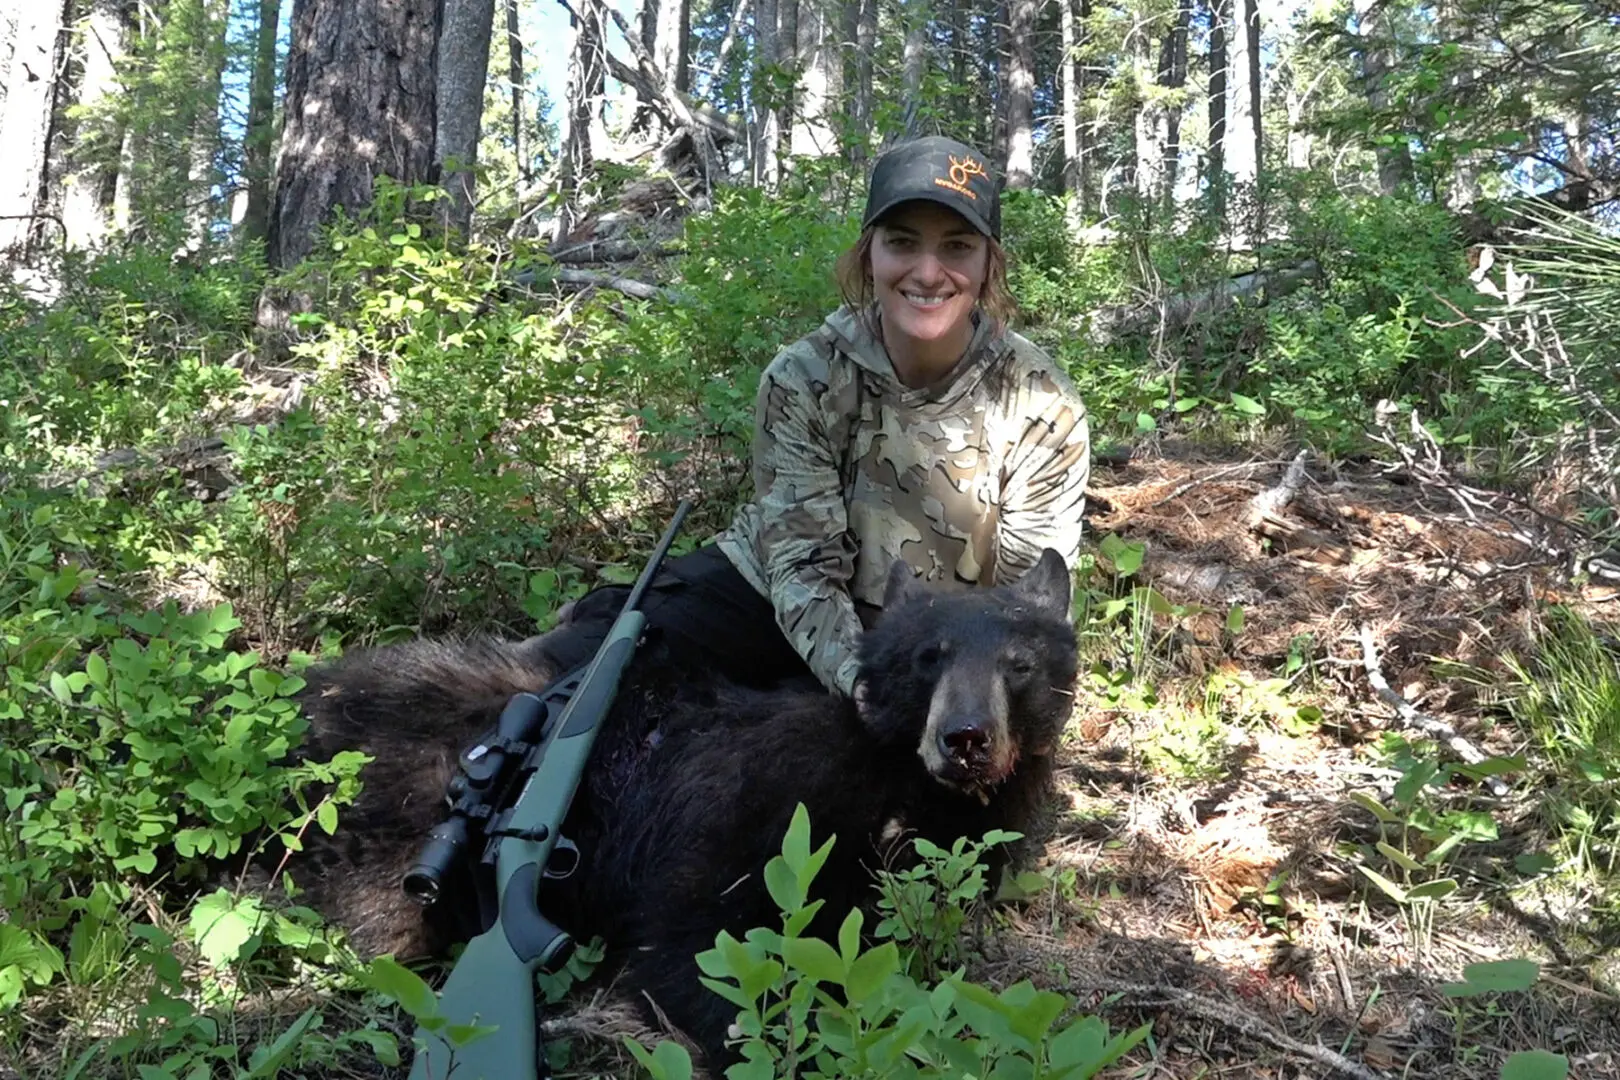 A woman in camouflage sitting on the back of a bear.